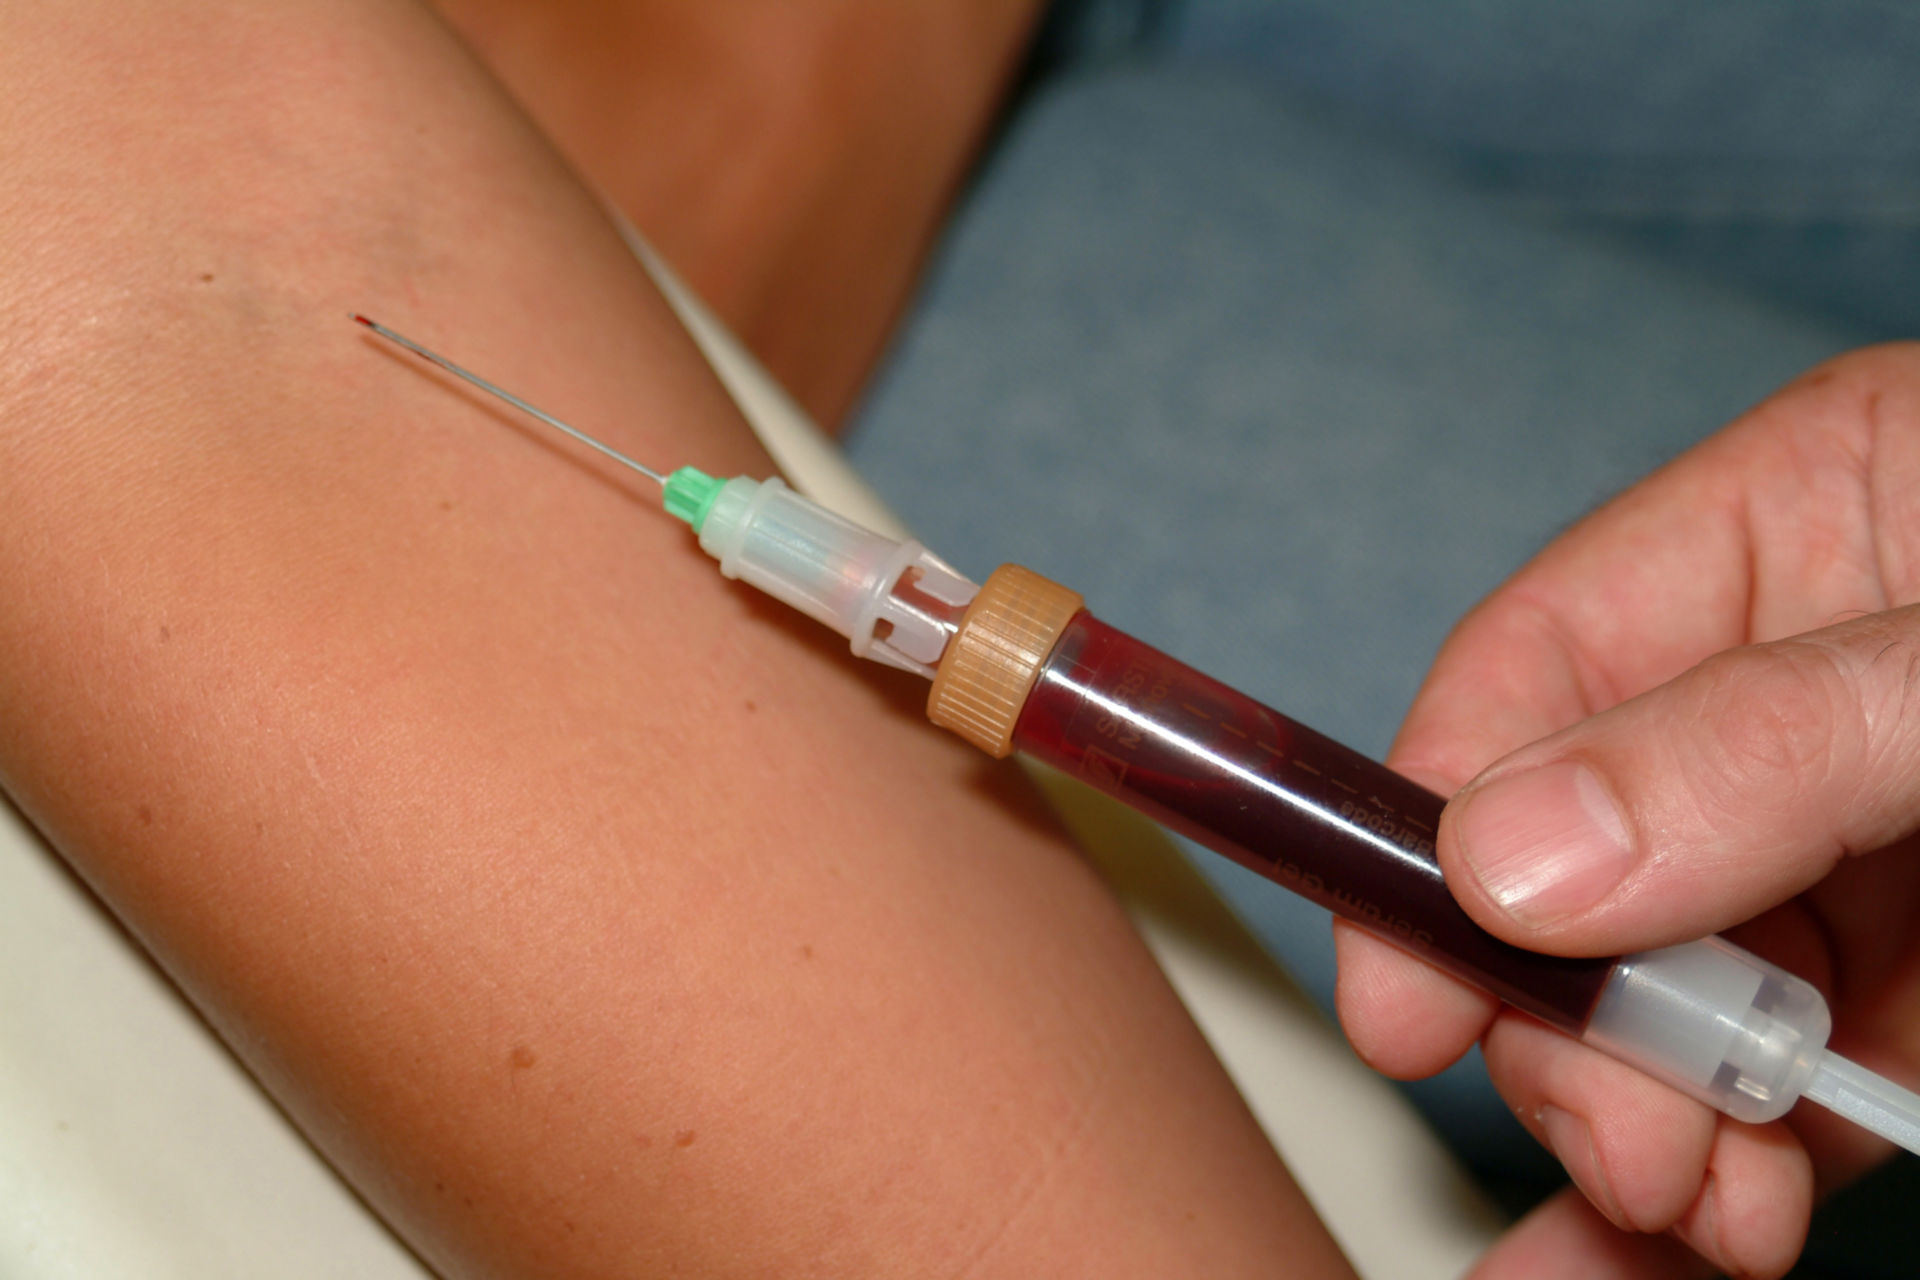 Blood sampling with a cannula